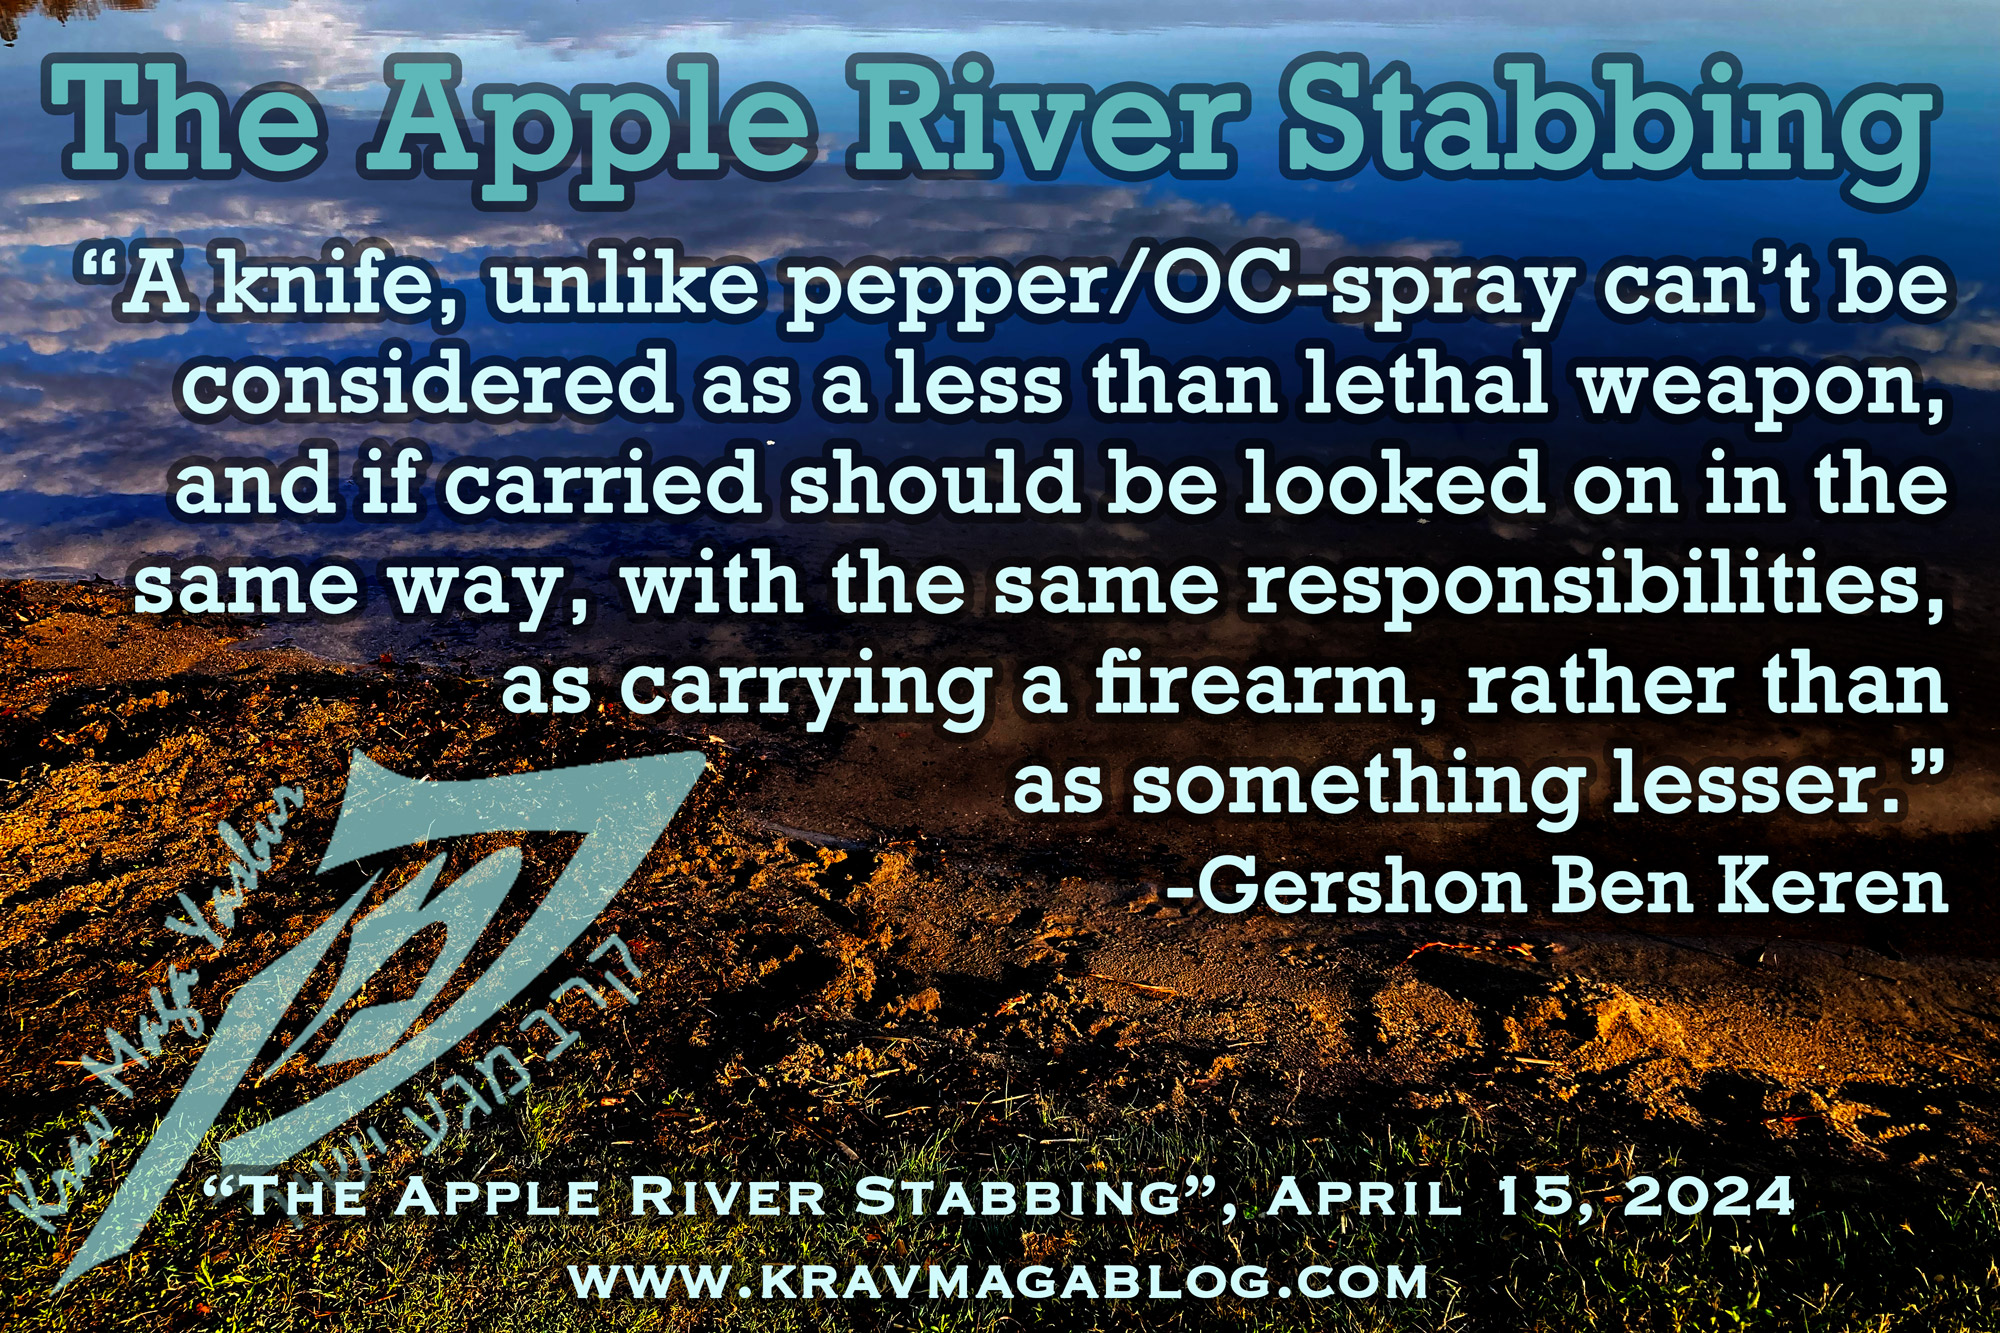 The Apple River Stabbing